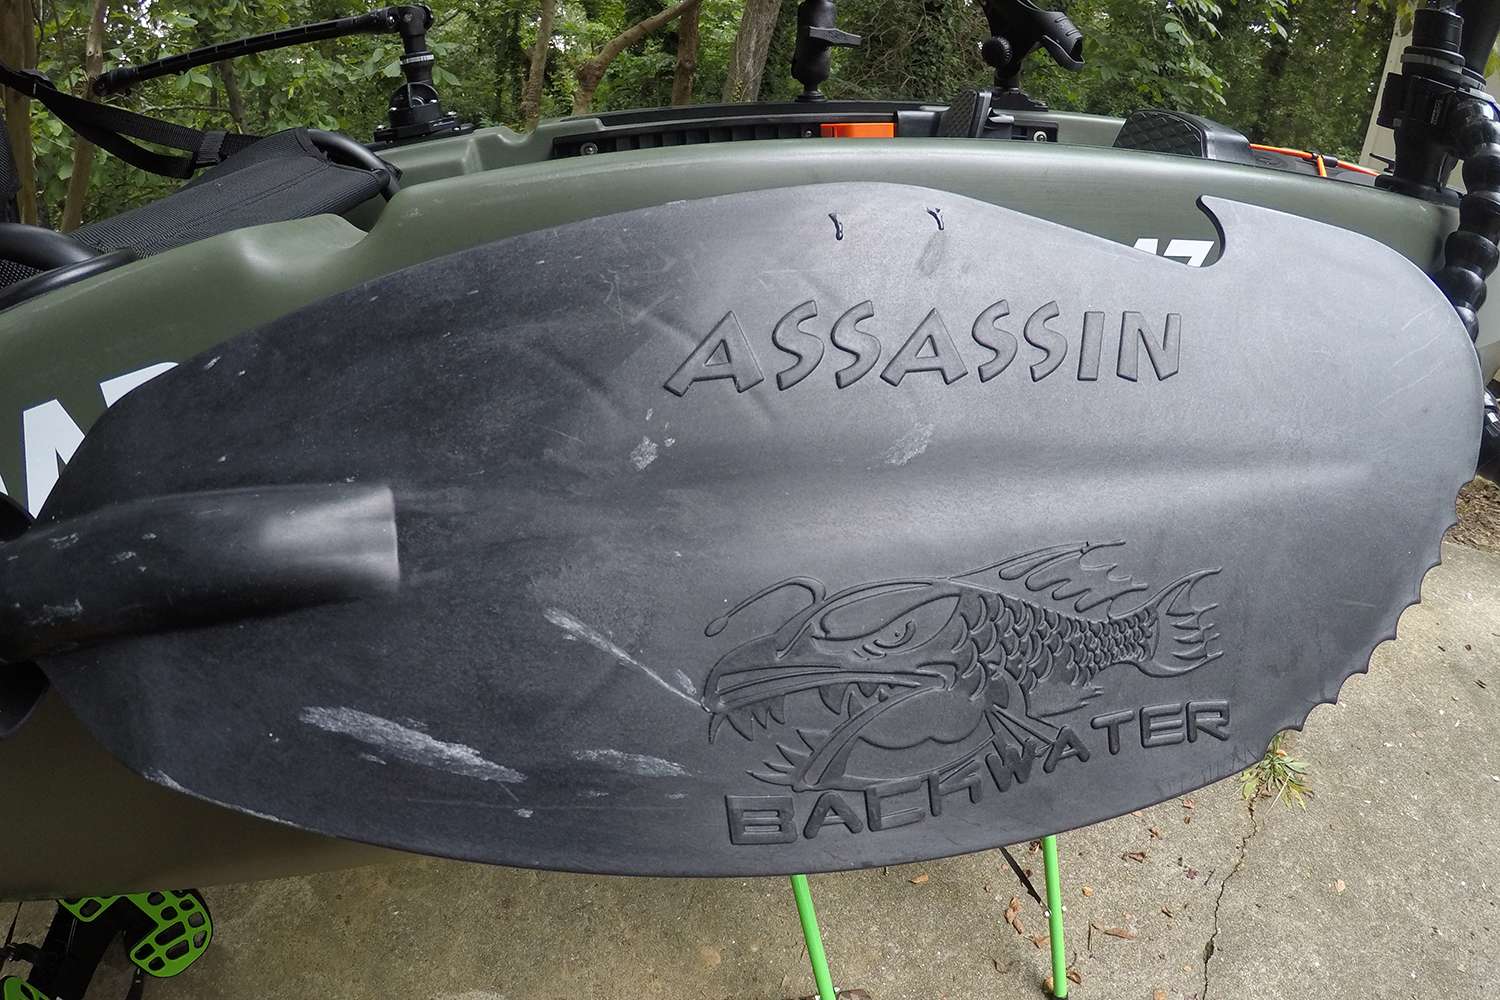 Conveniently attached to the side of the boat is a YakGear Backwater Assassin carbon fiber hybrid paddle. Built to break through vegetation and power and steer the kayak.